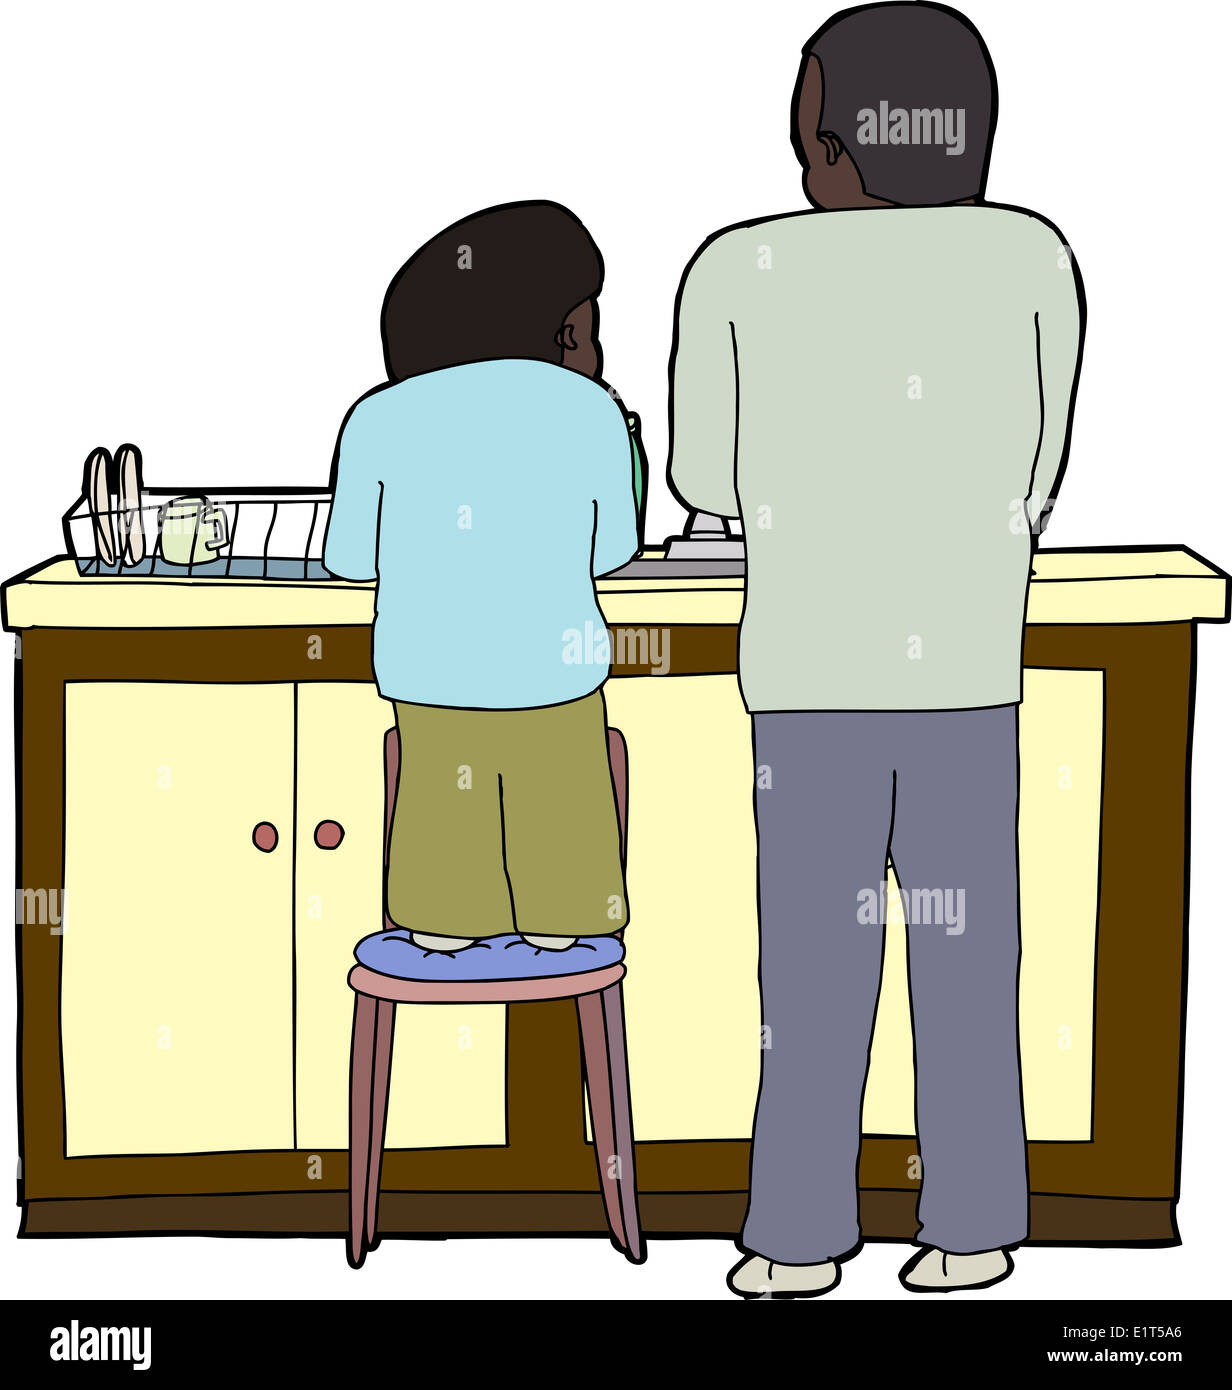 Child on chair helping father wash dishes Stock Photo